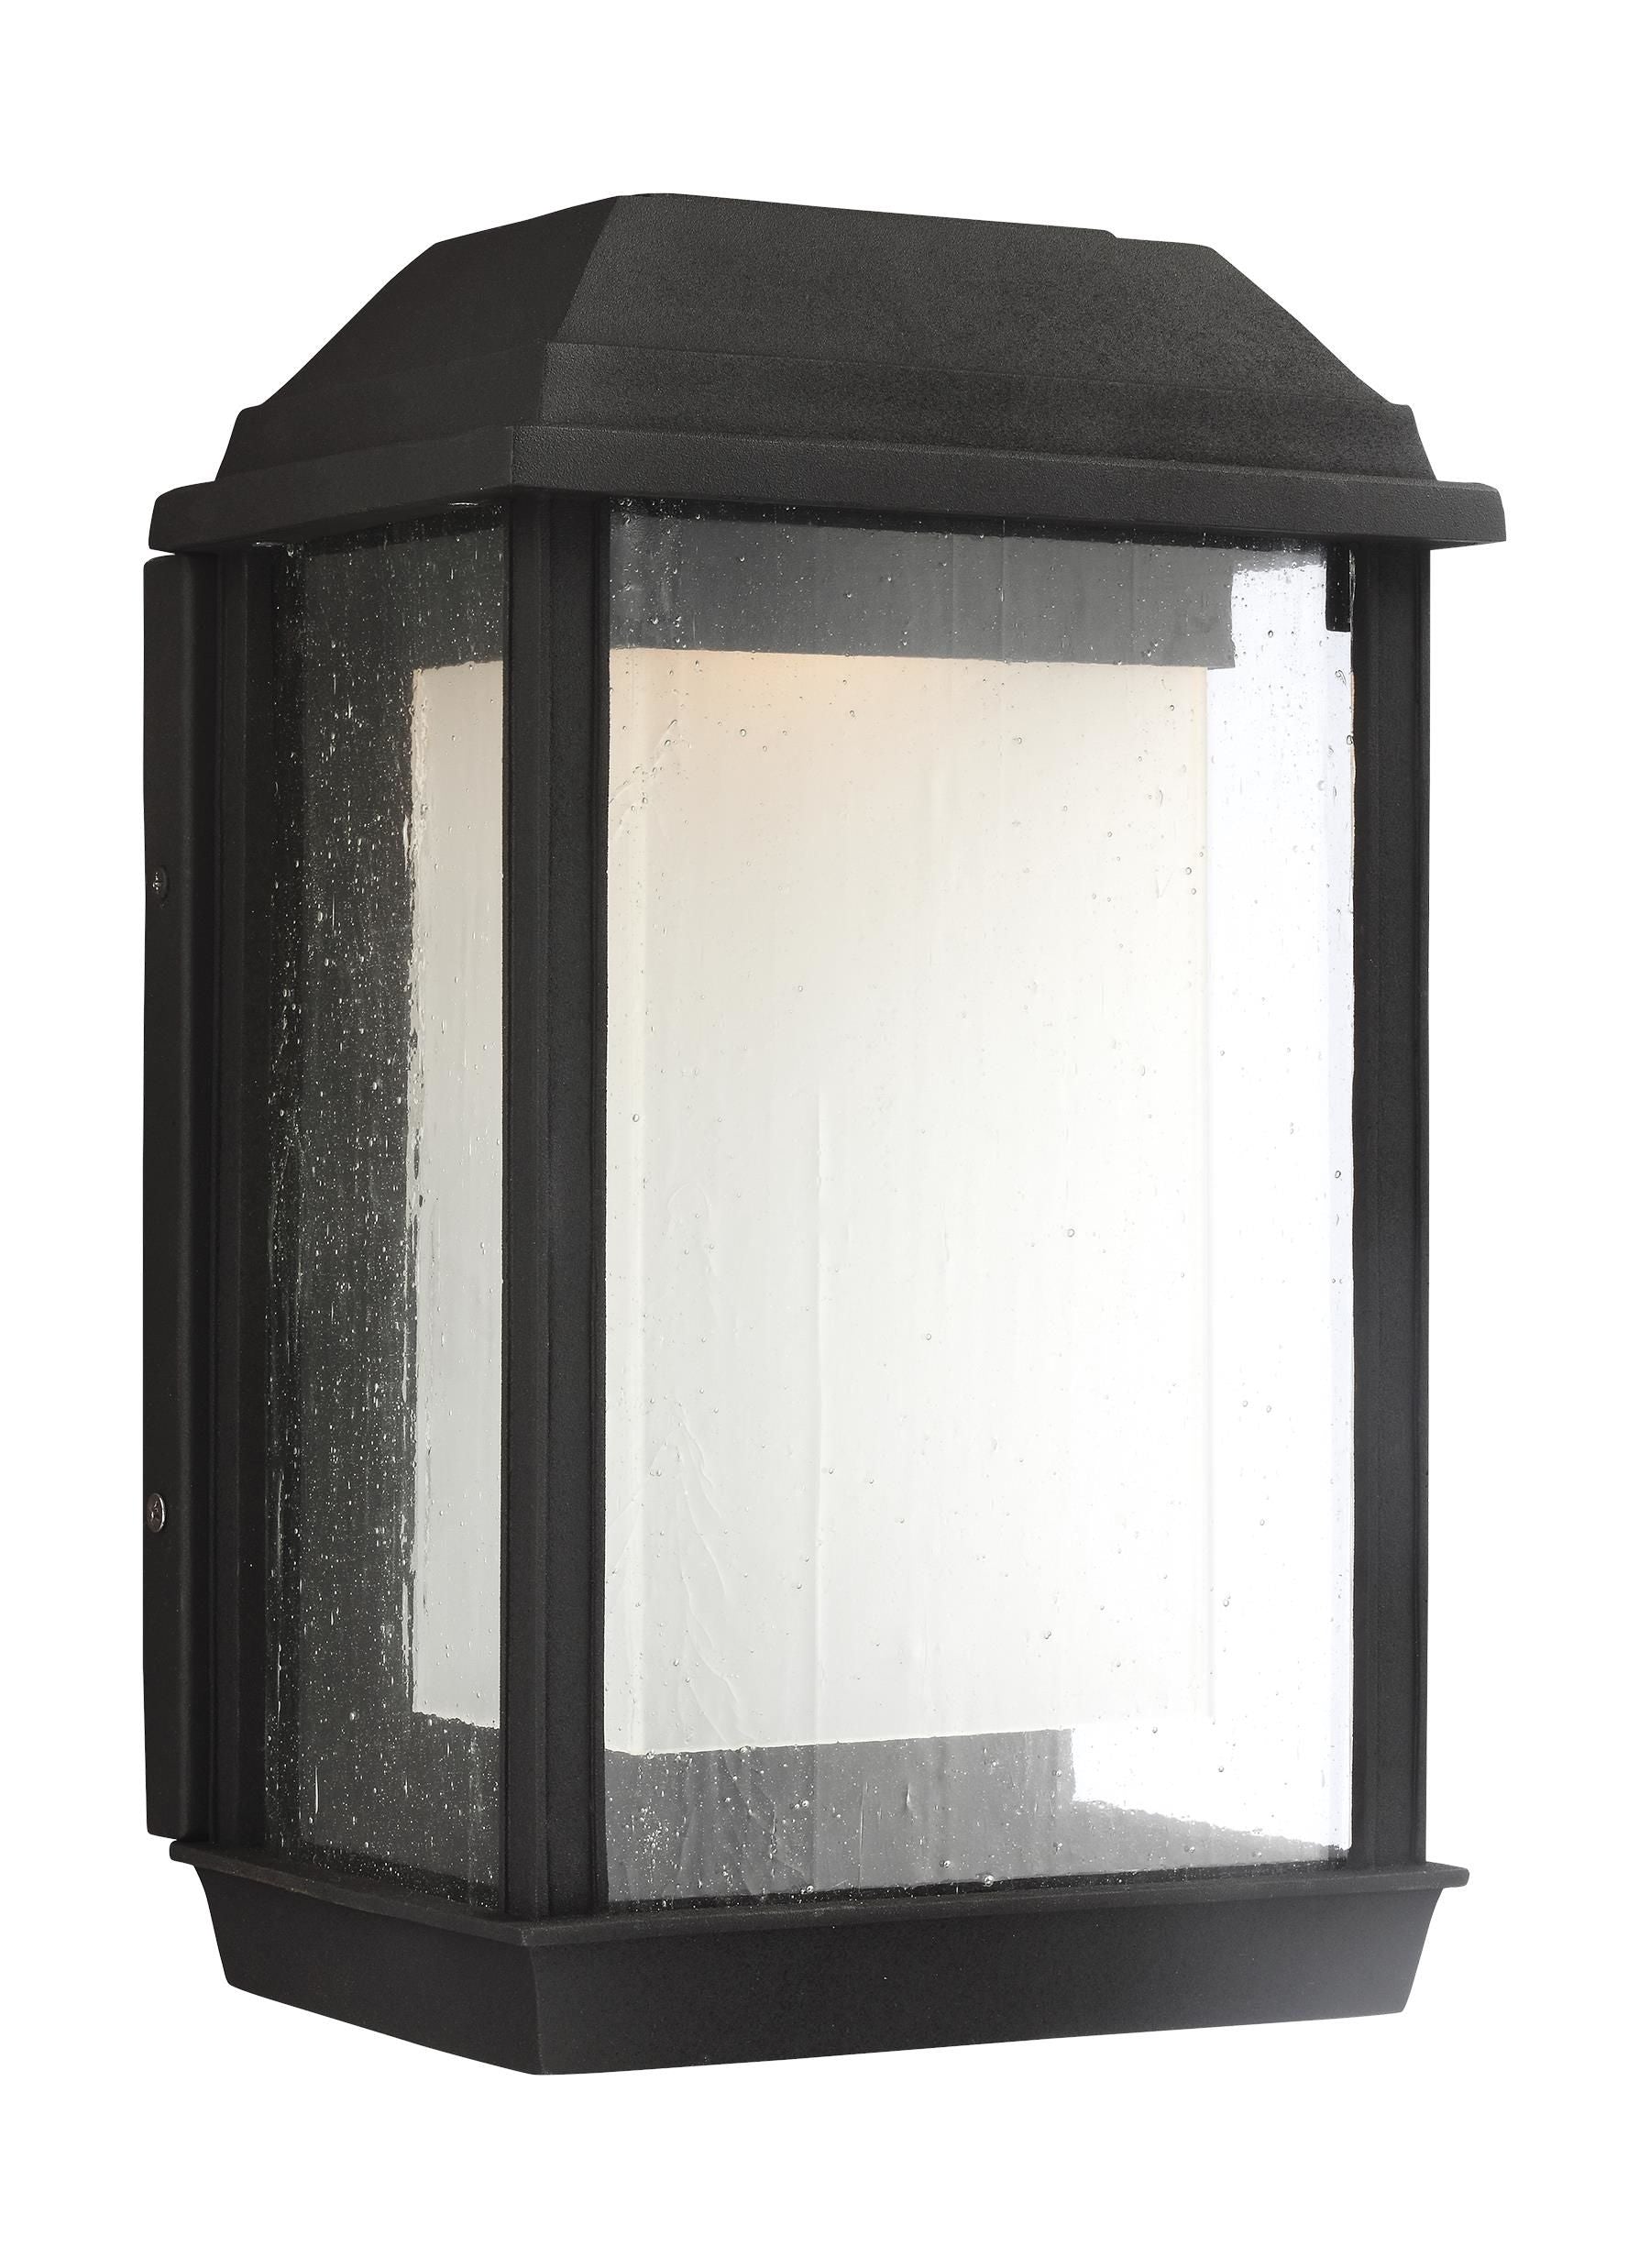 McHenry Outdoor sconce Black INTEGRATED LED - OL12801TXB-L1 | FEISS